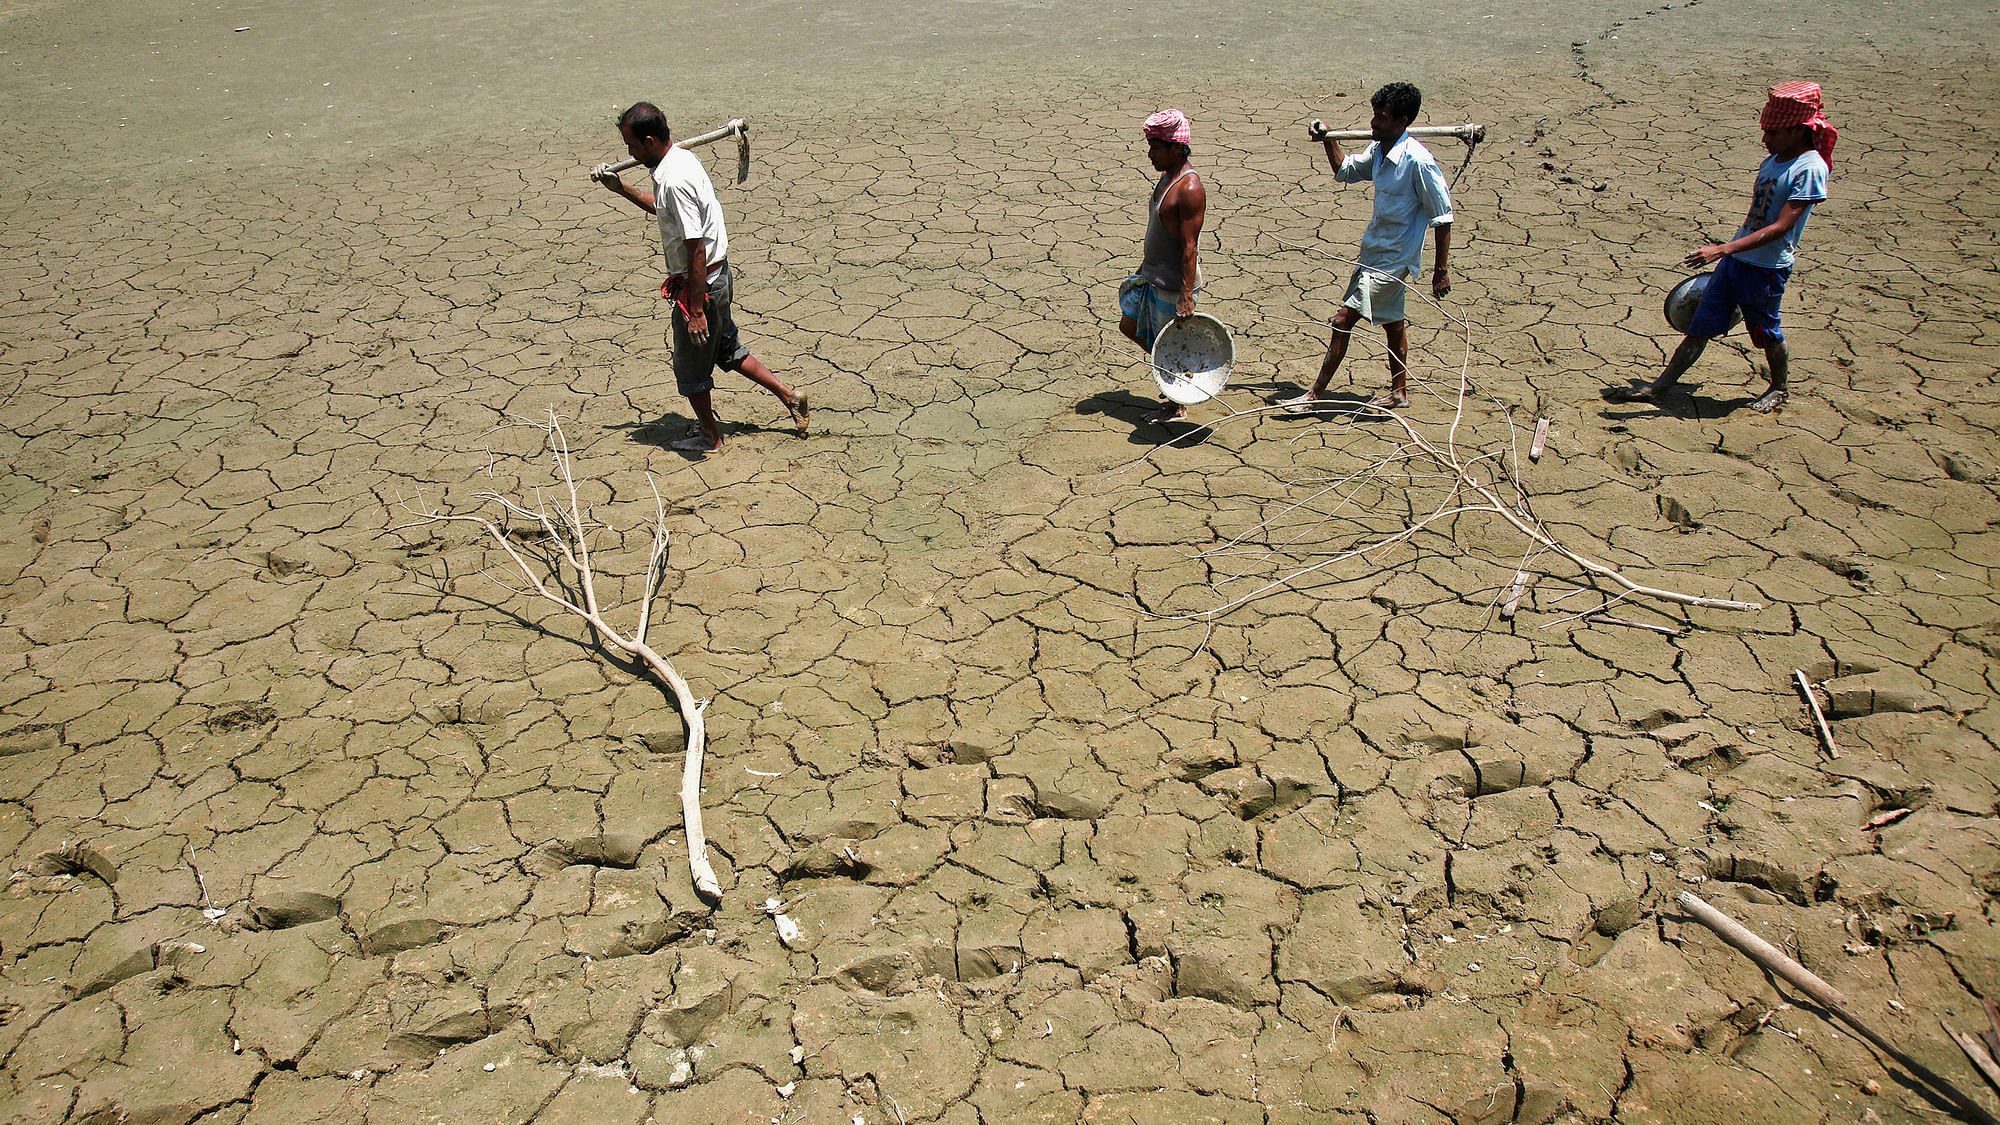 Parched lands of a dried lake. (Photo: Reuters)